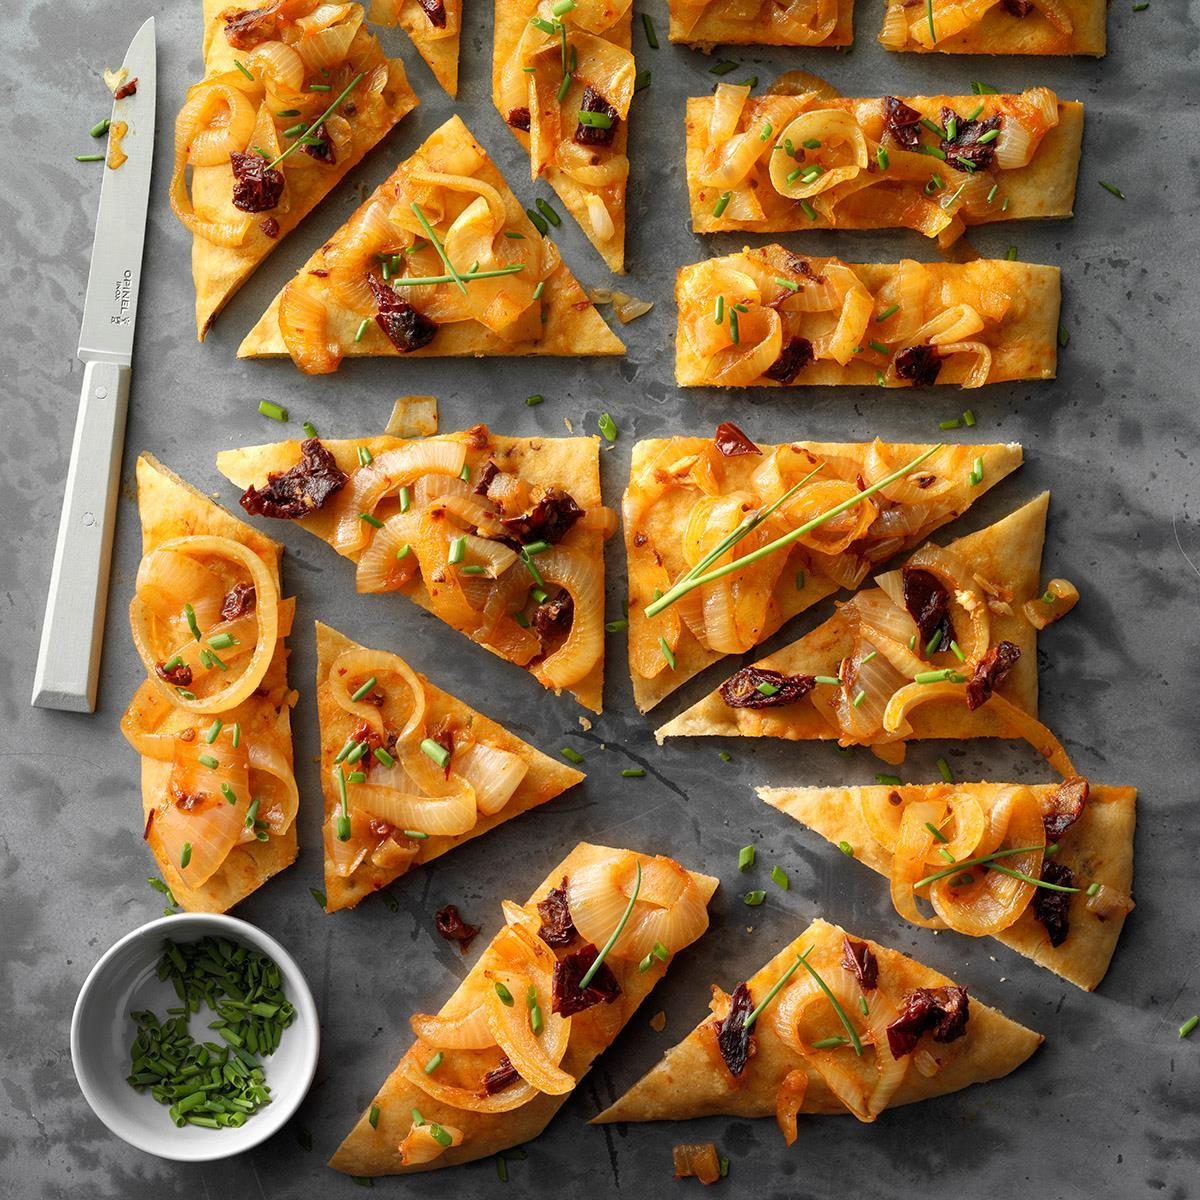 https://www.tasteofhome.com/wp-content/uploads/2018/01/Chipotle-Focaccia-with-Garlic-Onion-Topping_EXPS_FBMZ19_86649_E05_02_2b.jpg